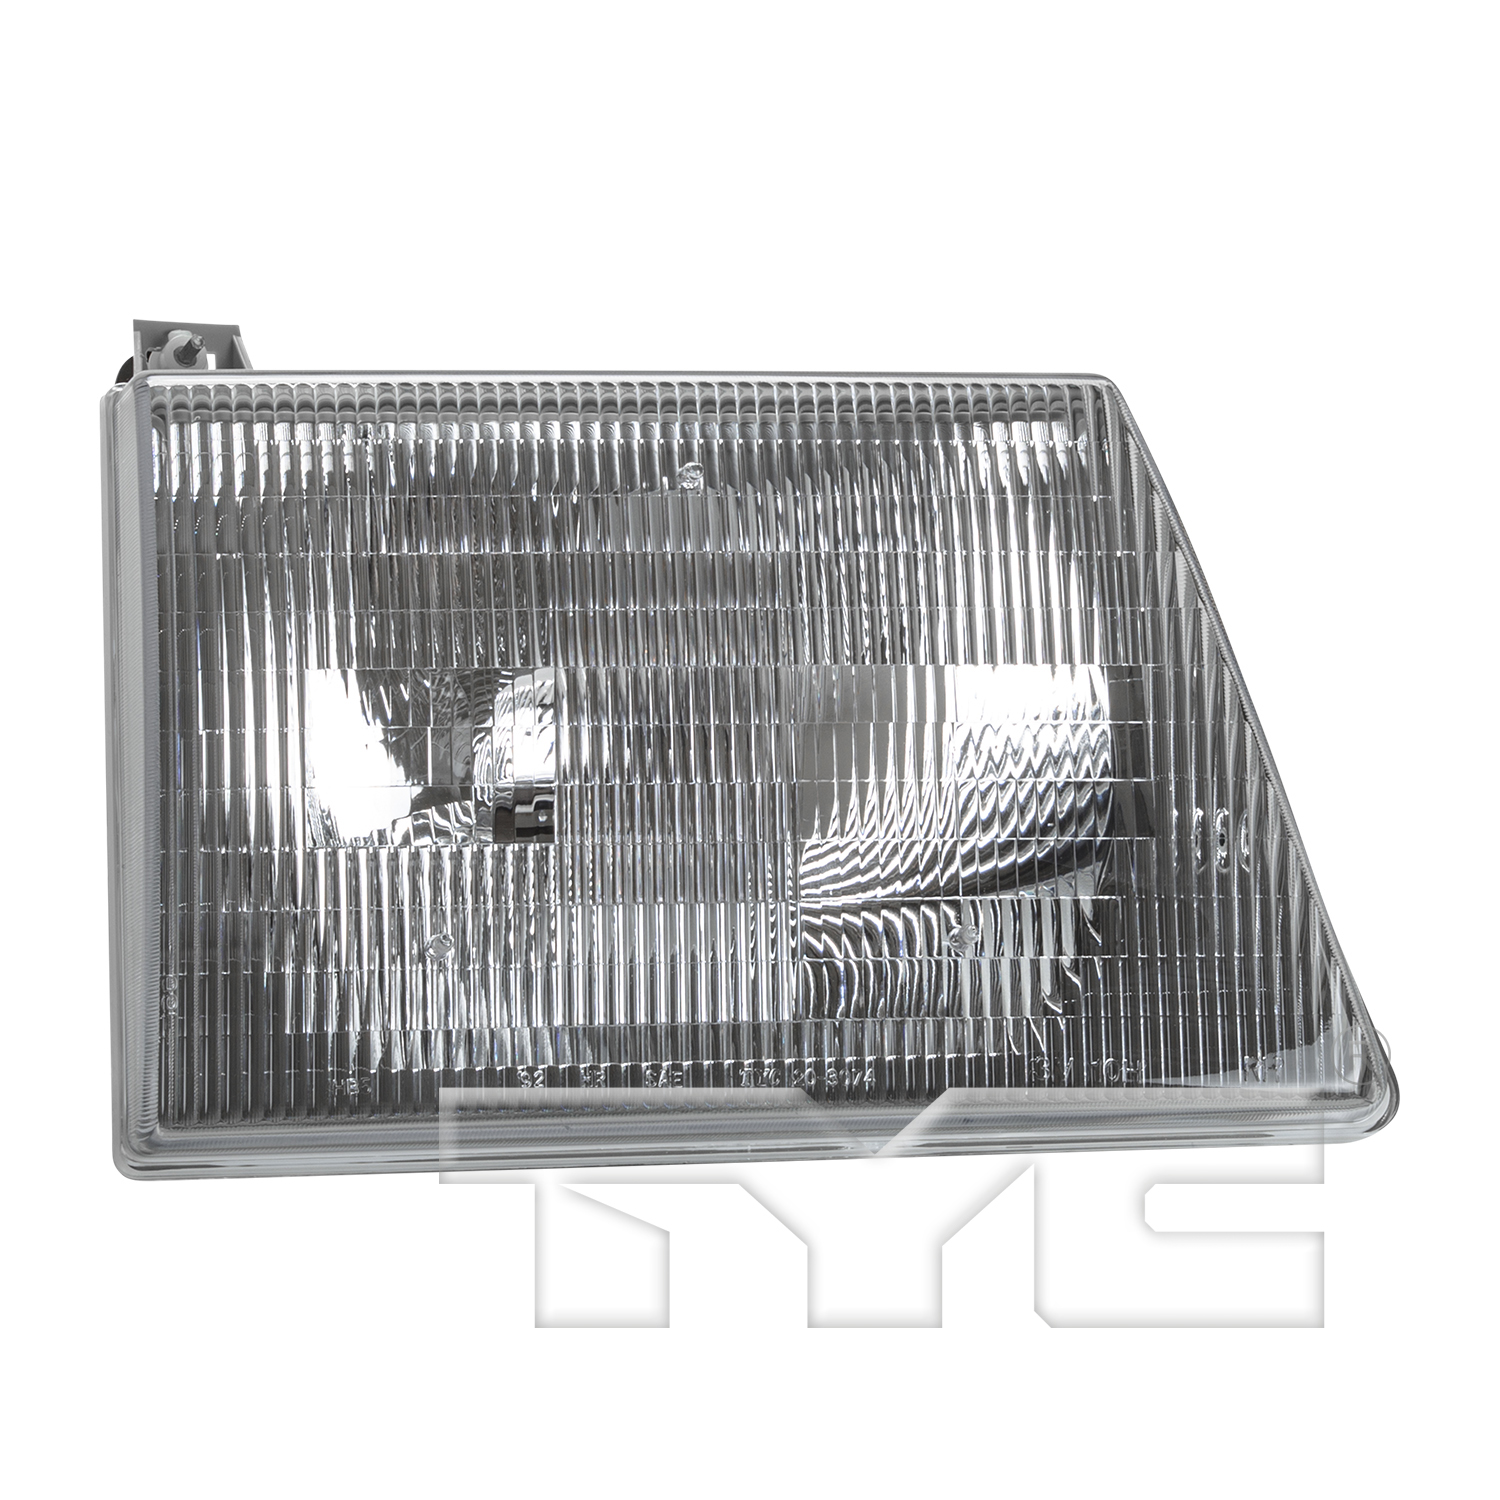 Aftermarket HEADLIGHTS for FORD - E-450 ECONOLINE SUPER DUTY, E-450 ECONOLINE SUPER DUTY,99-02,RT Headlamp assy composite